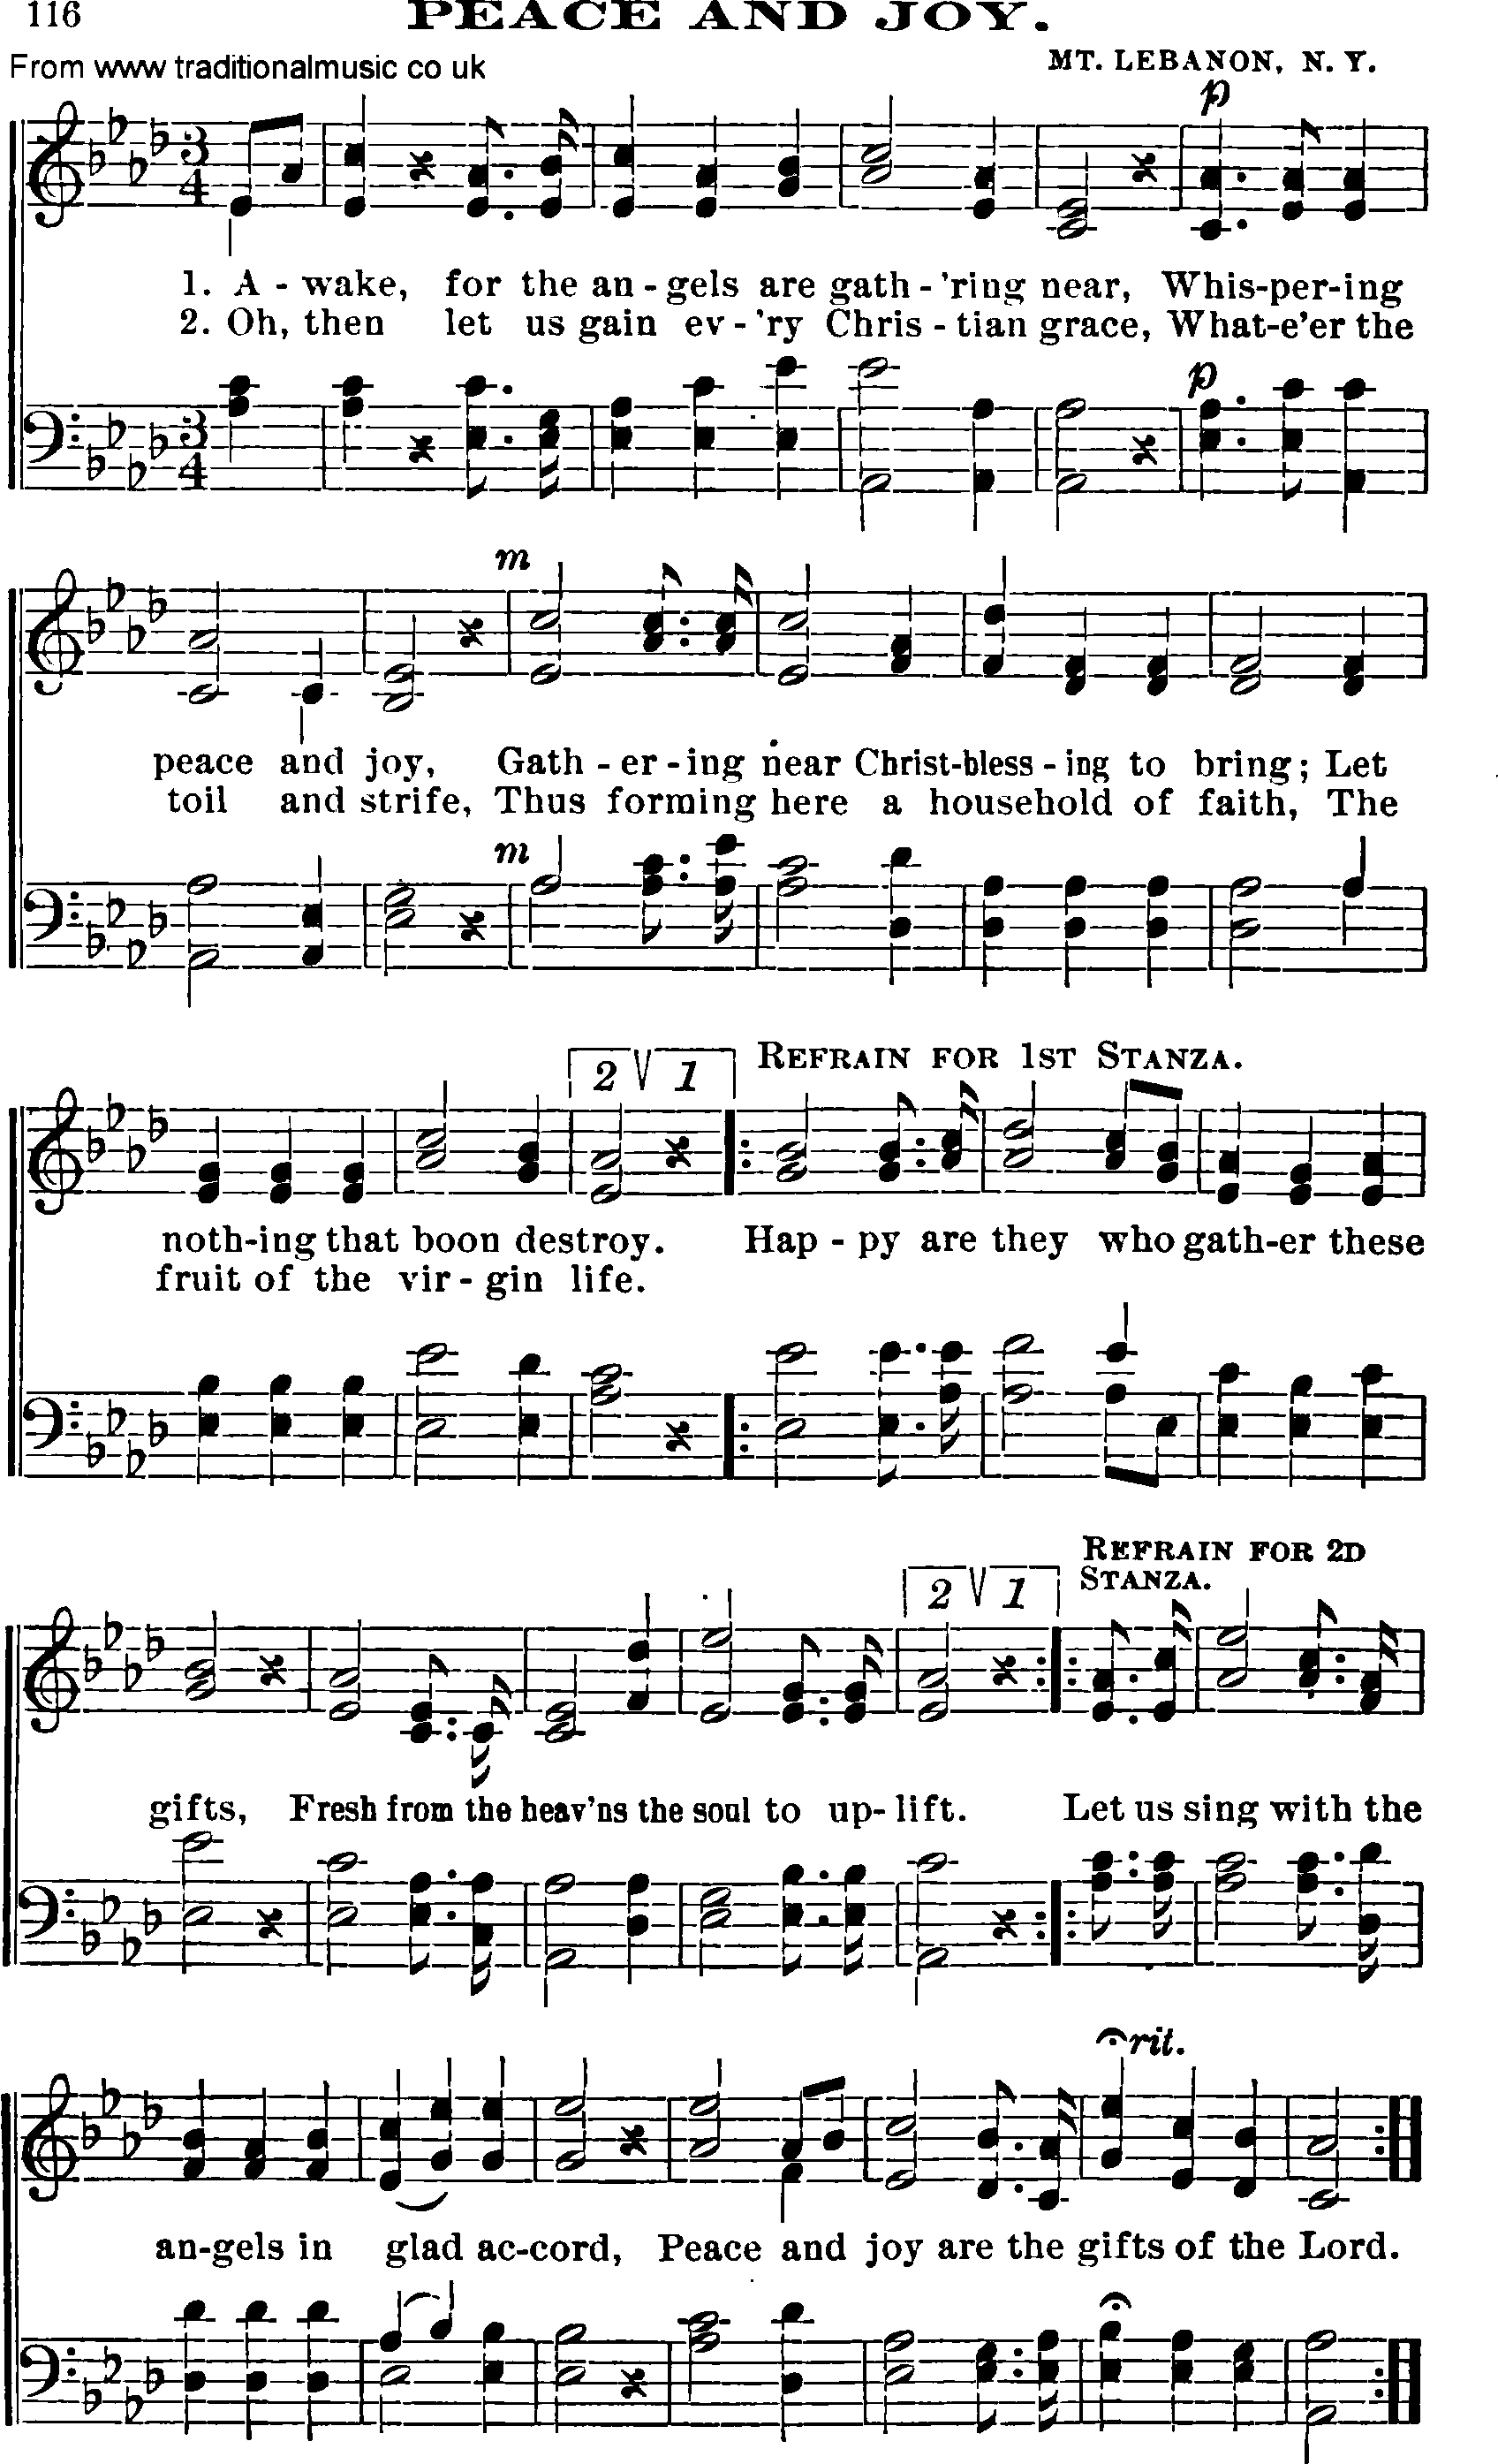 Shaker Music collection, Hymn: peace and joy, sheetmusic and PDF